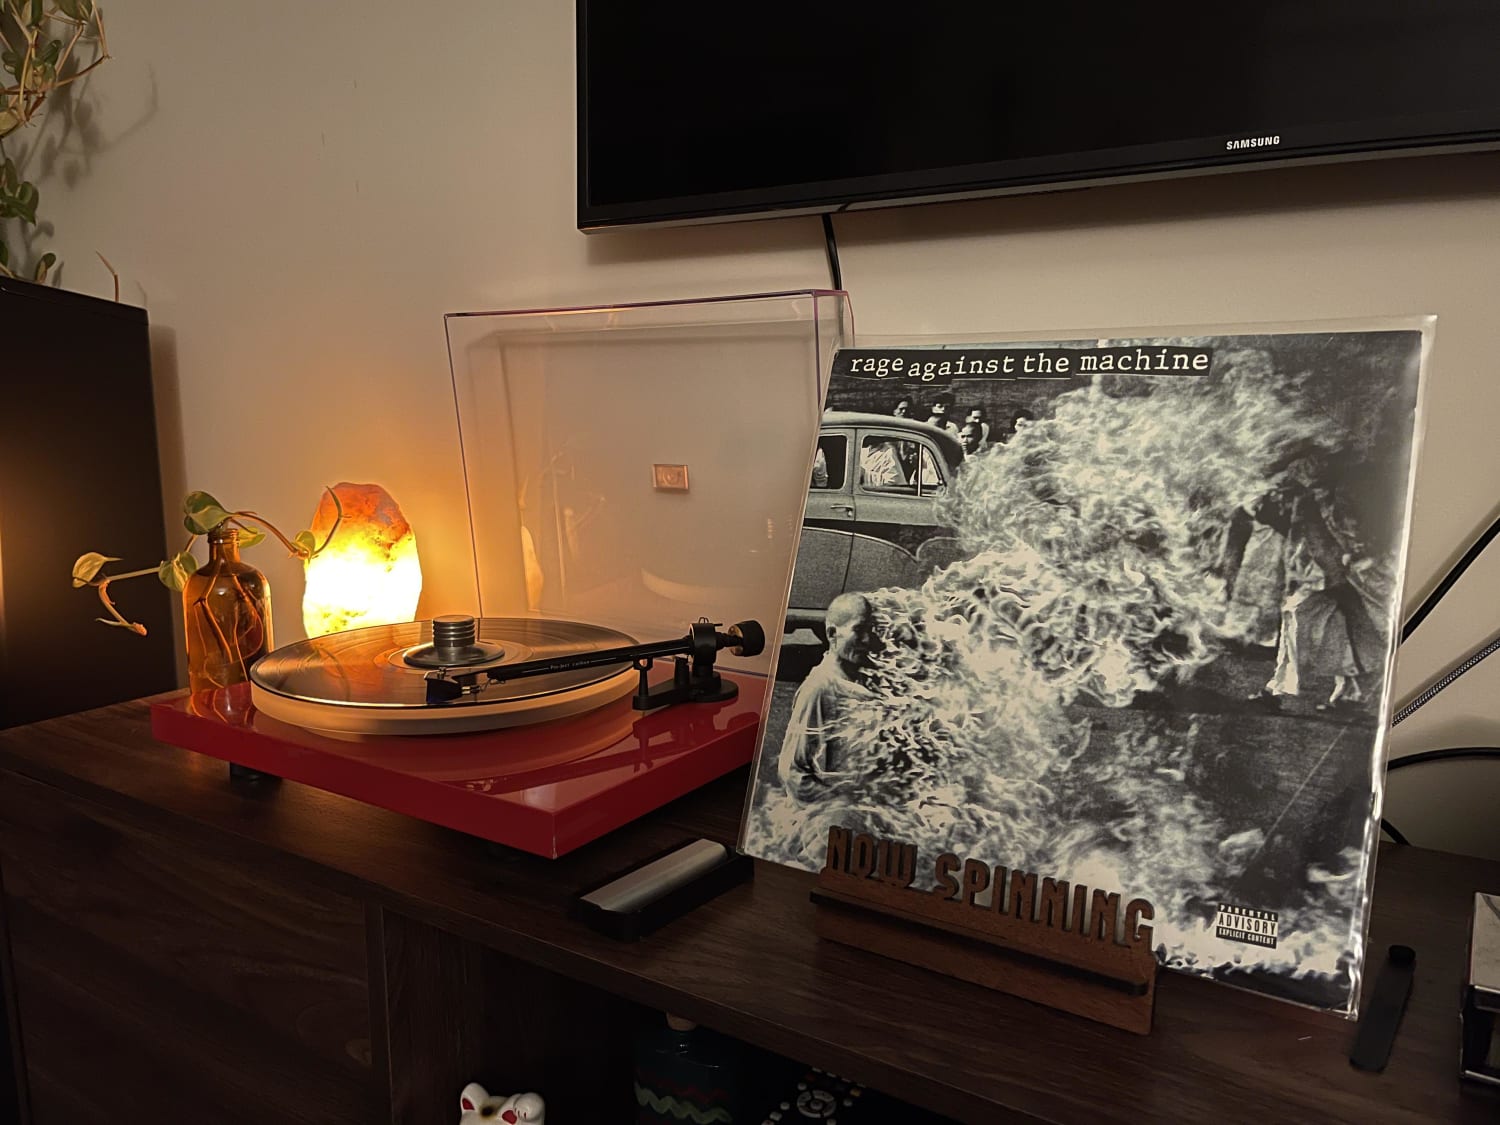 Seems like an appropriate listen at this time – original '92 pressing of Rage Against The Machine s/t.